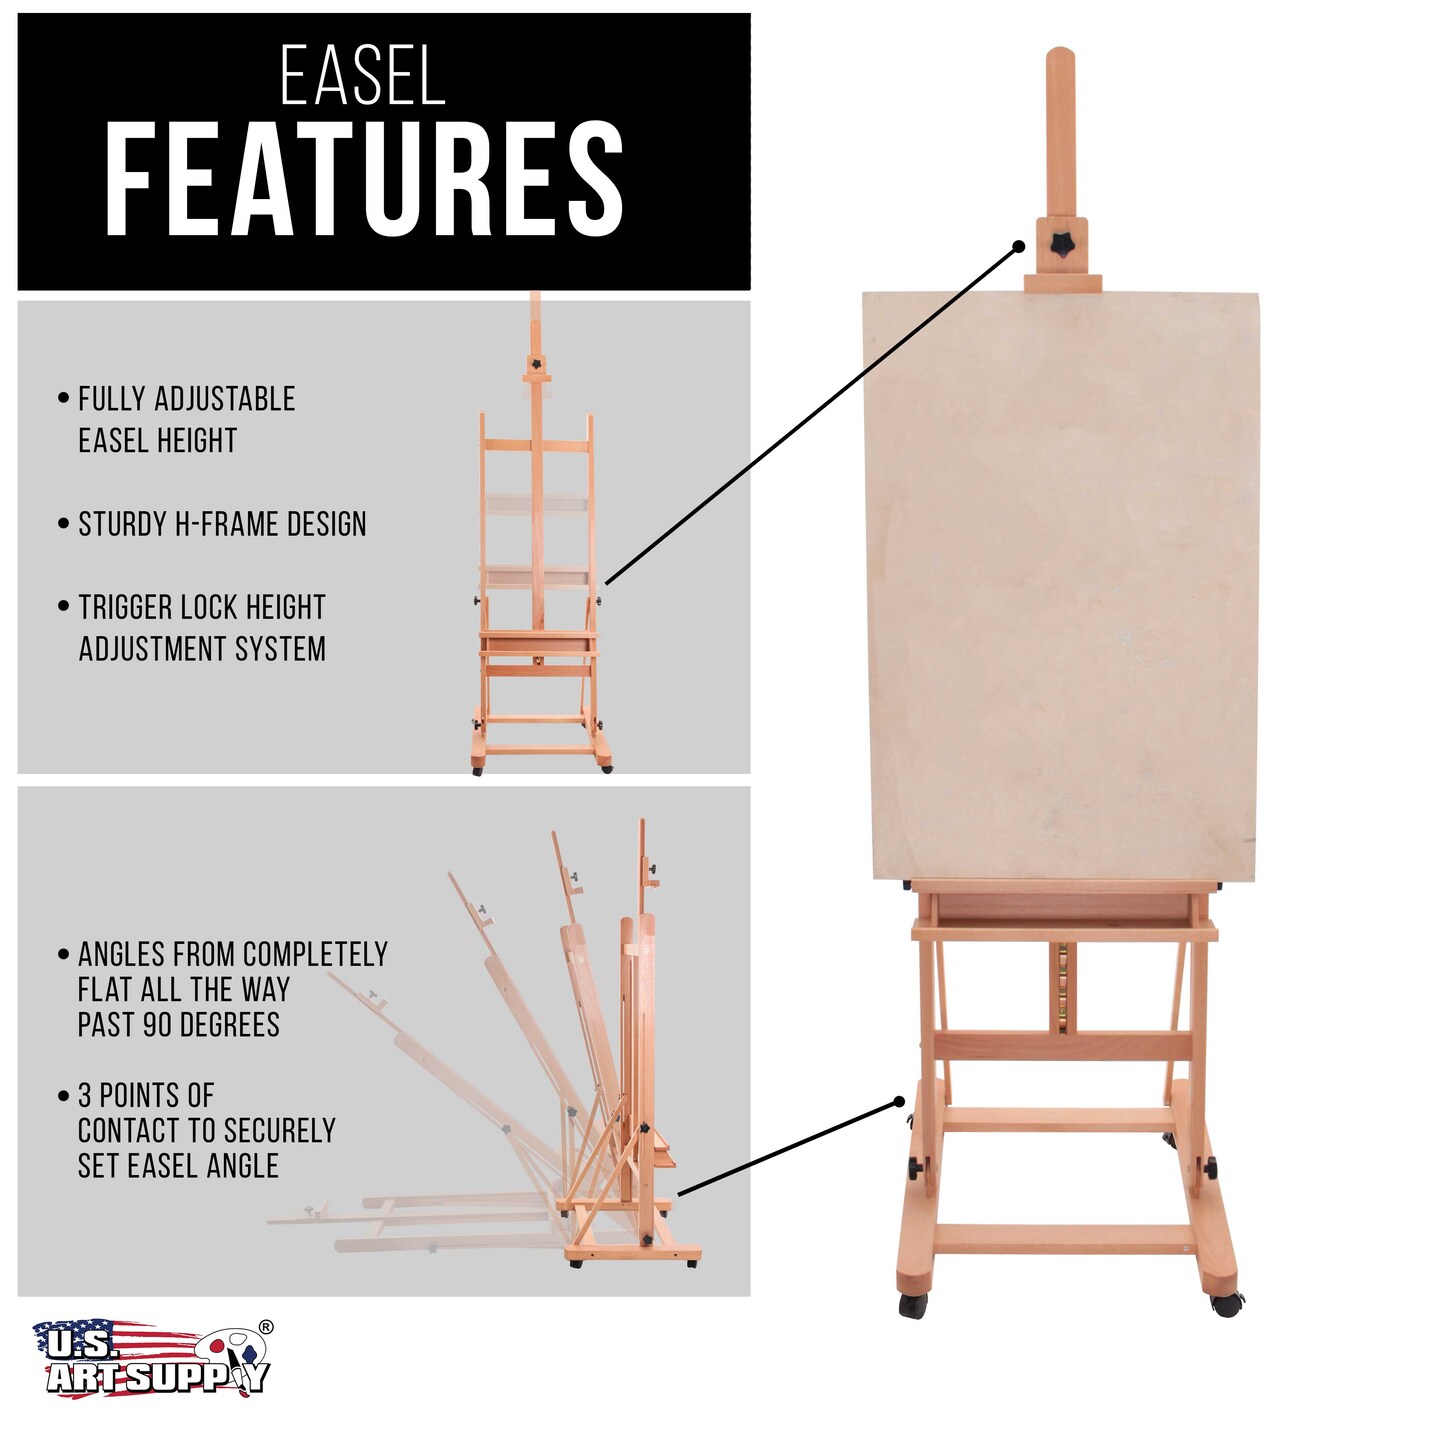 Medium Wooden H-Frame Studio Easel with Artist Storage Tray and Wheels - Mast Adjustable to 96&#x22; High, Holds Canvas to 48&#x22; Sturdy Beechwood Floor Stand